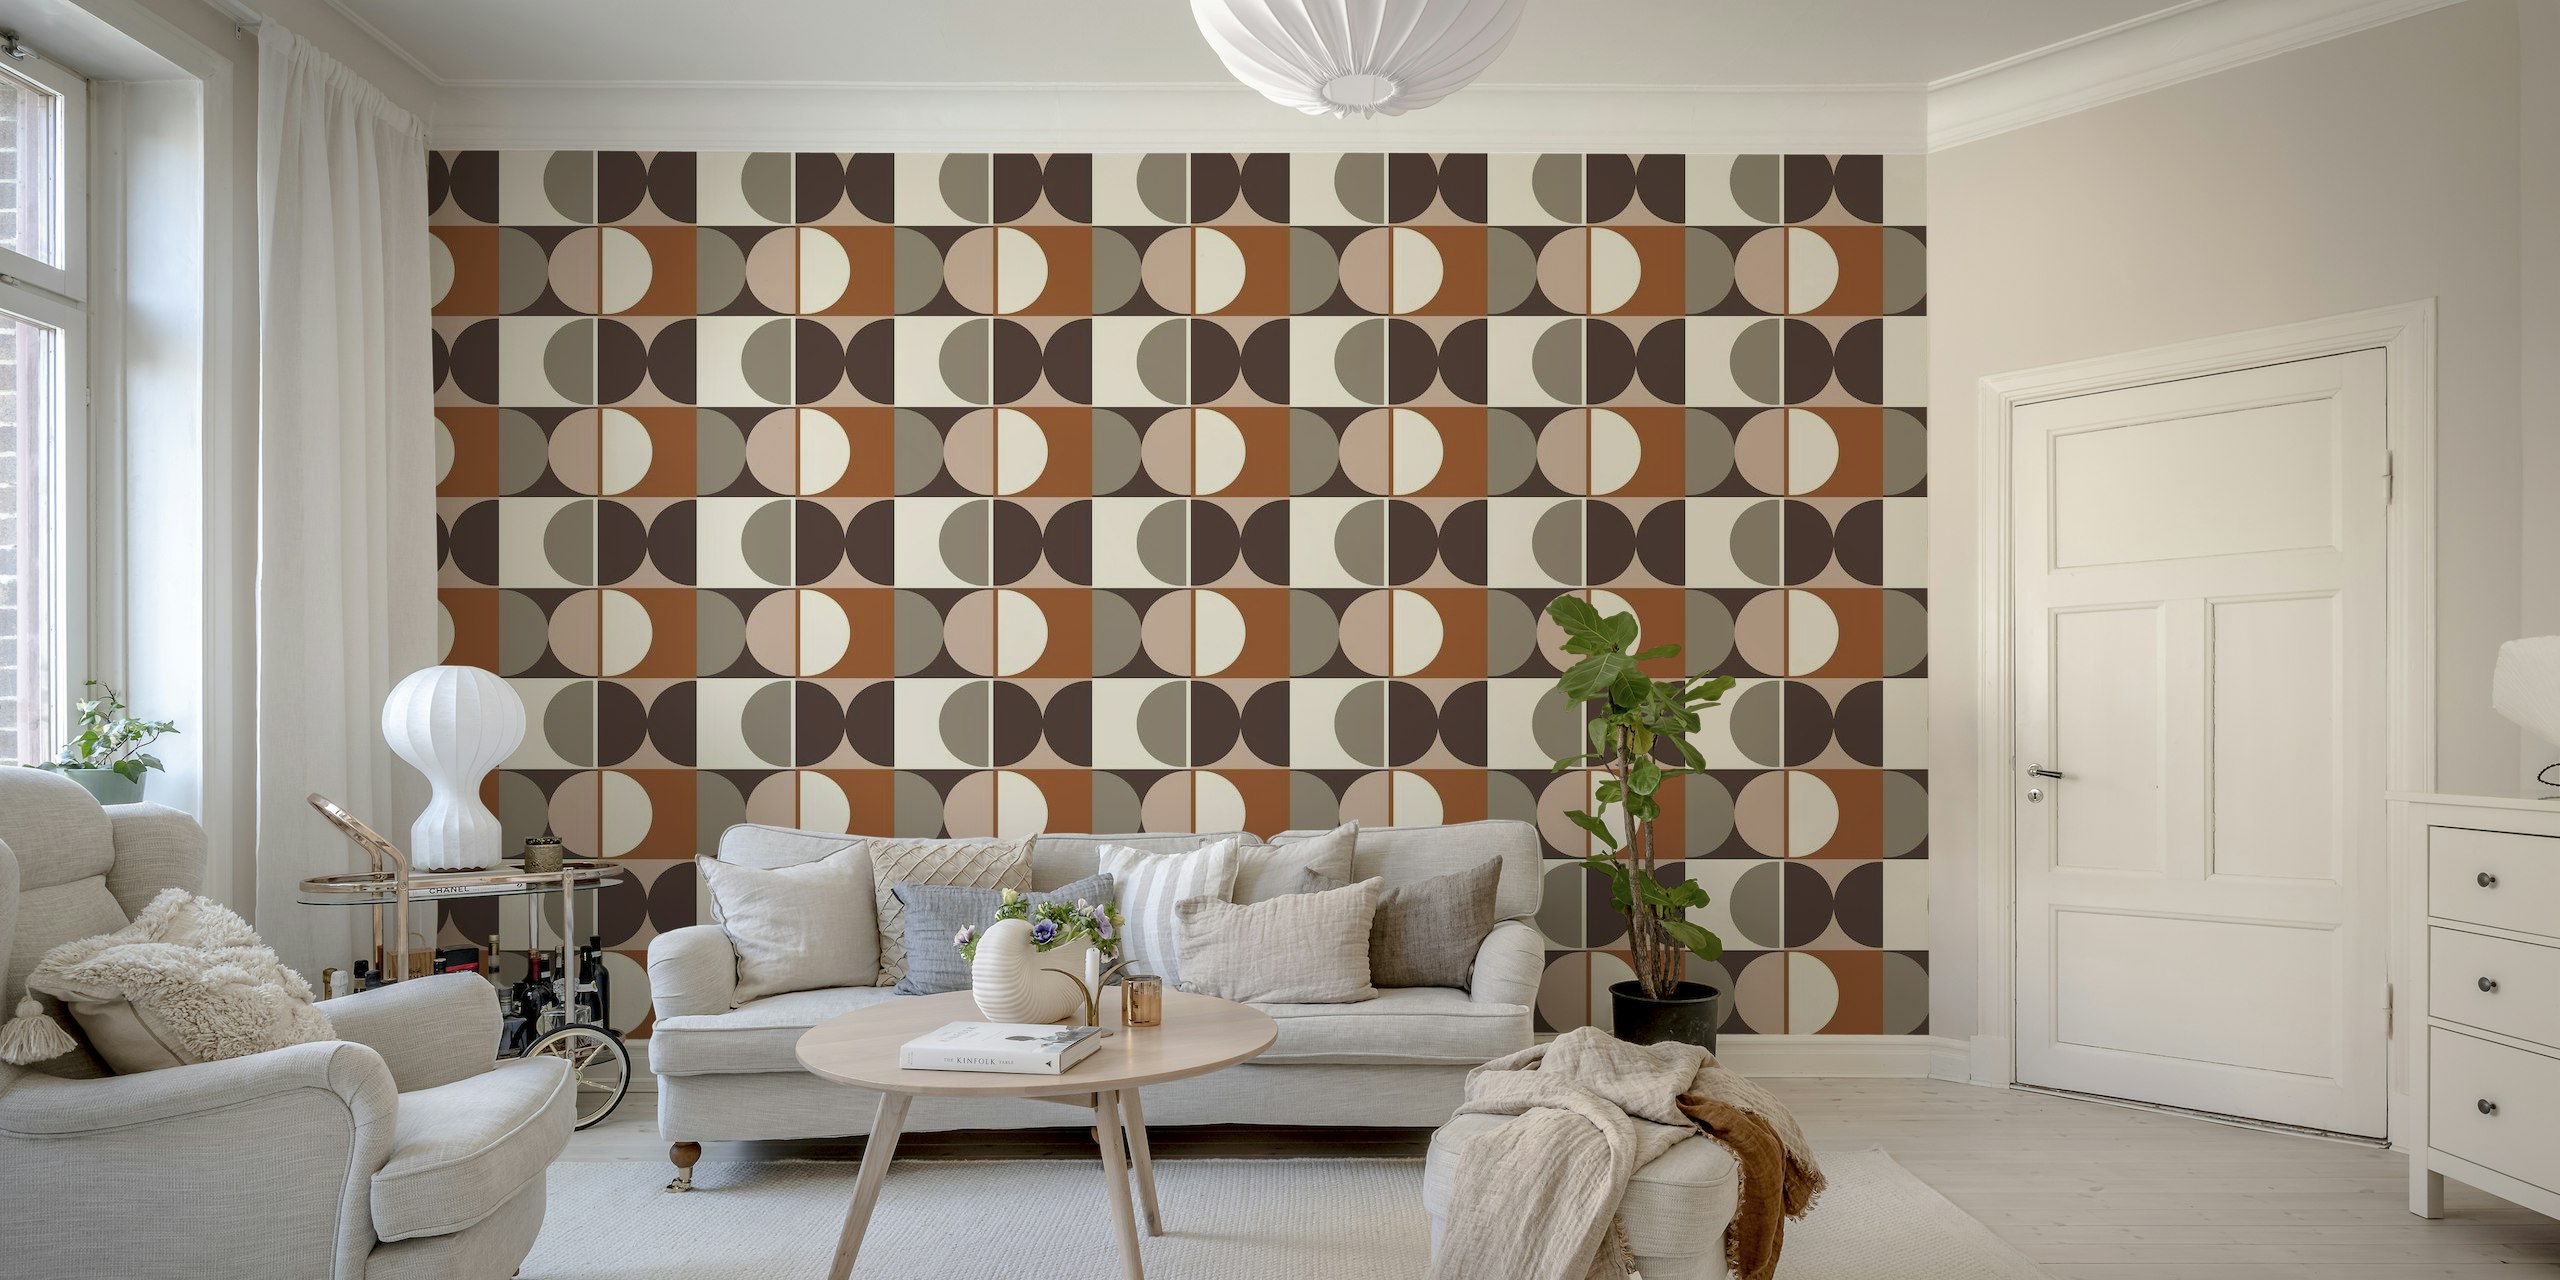 Play - Bronze 2 geometric shapes mural with earthy tones